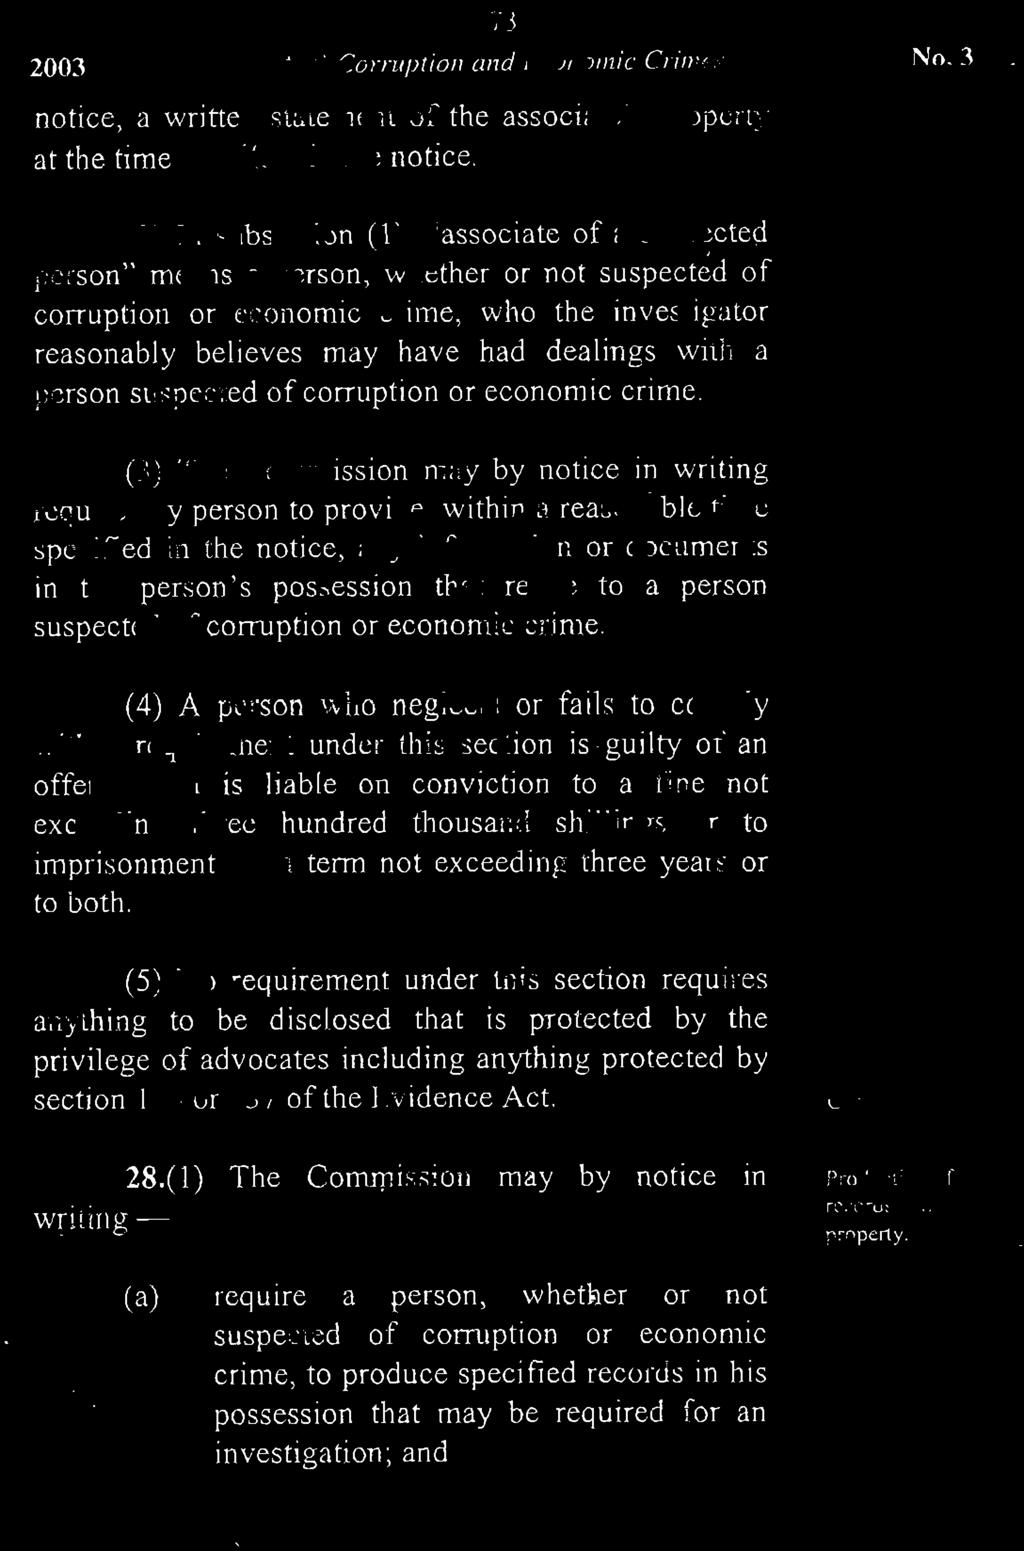 73 2003 Anti-Corruption and Economic Crimes No. 3 notice, a written statem t of the associate's property at the time specifie the notice.